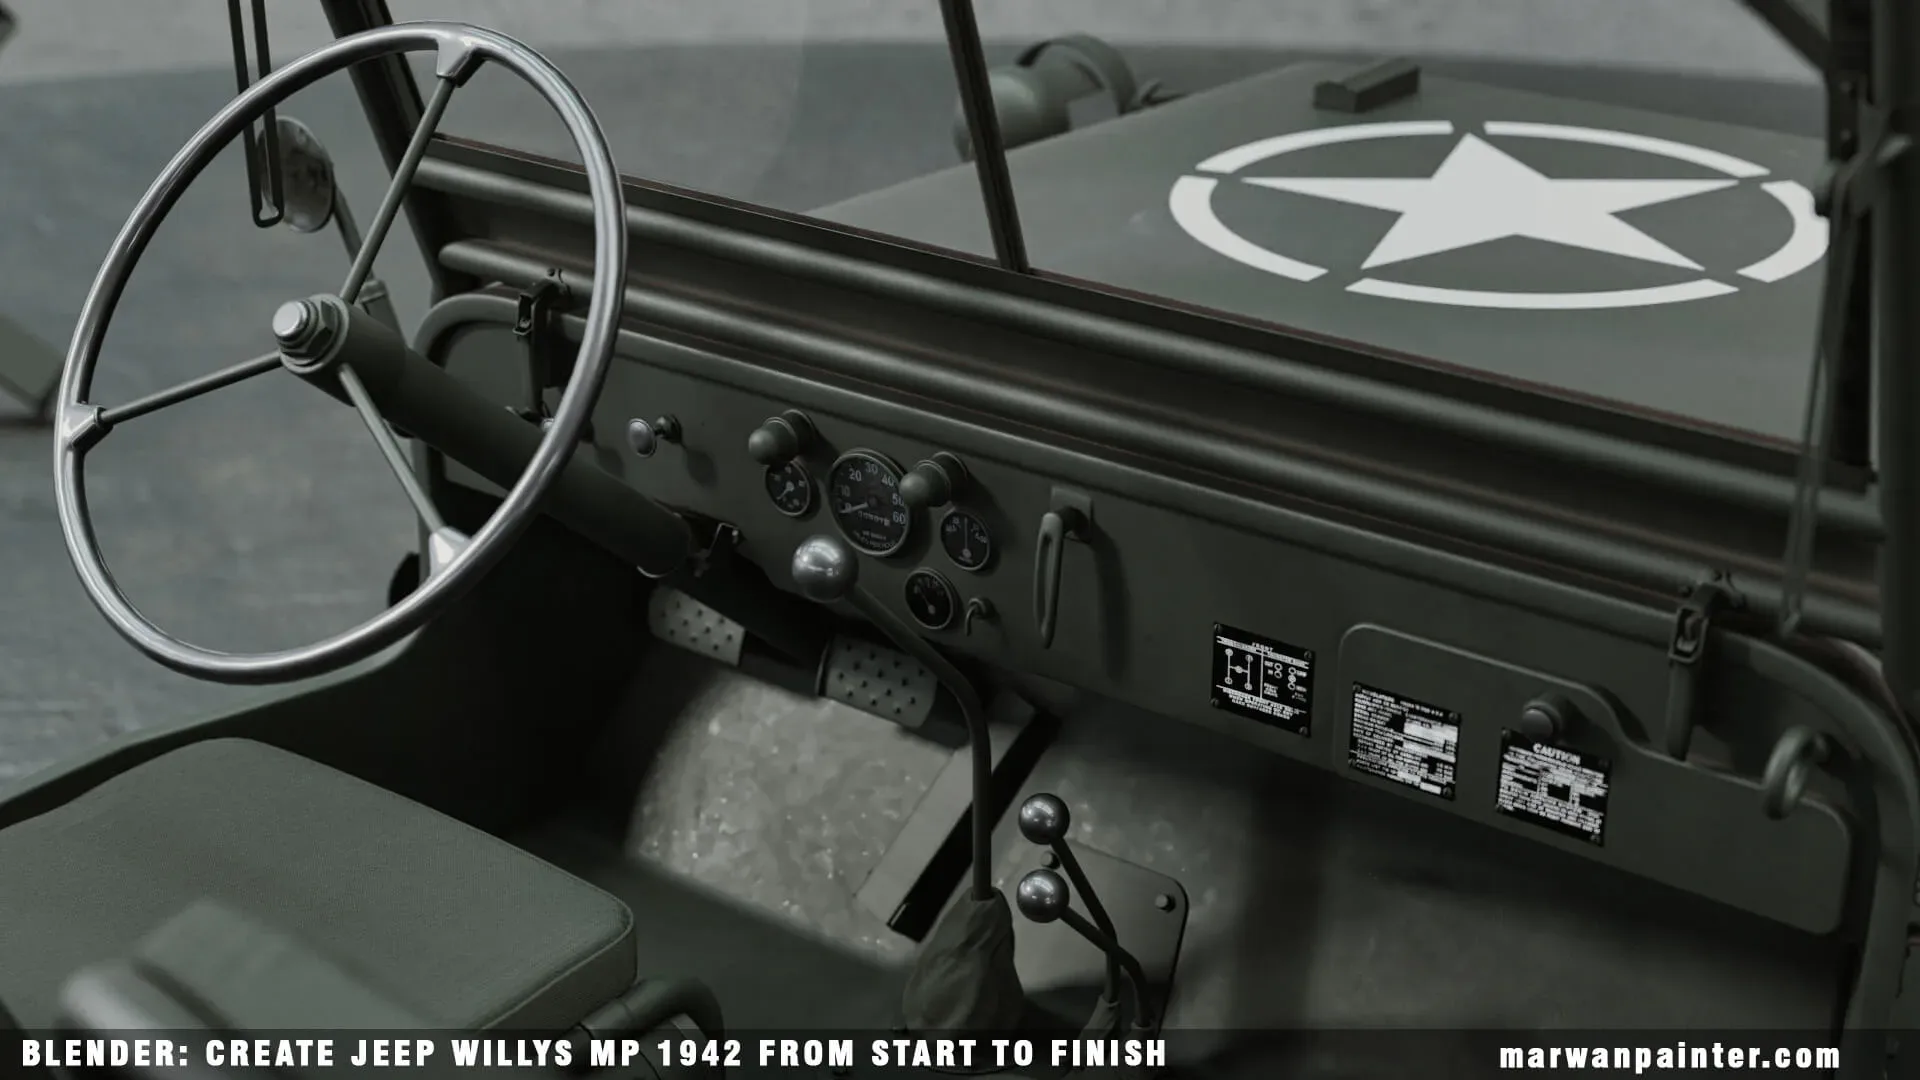 Blender: Create Jeep Willys MB 1942 From Start To Finish